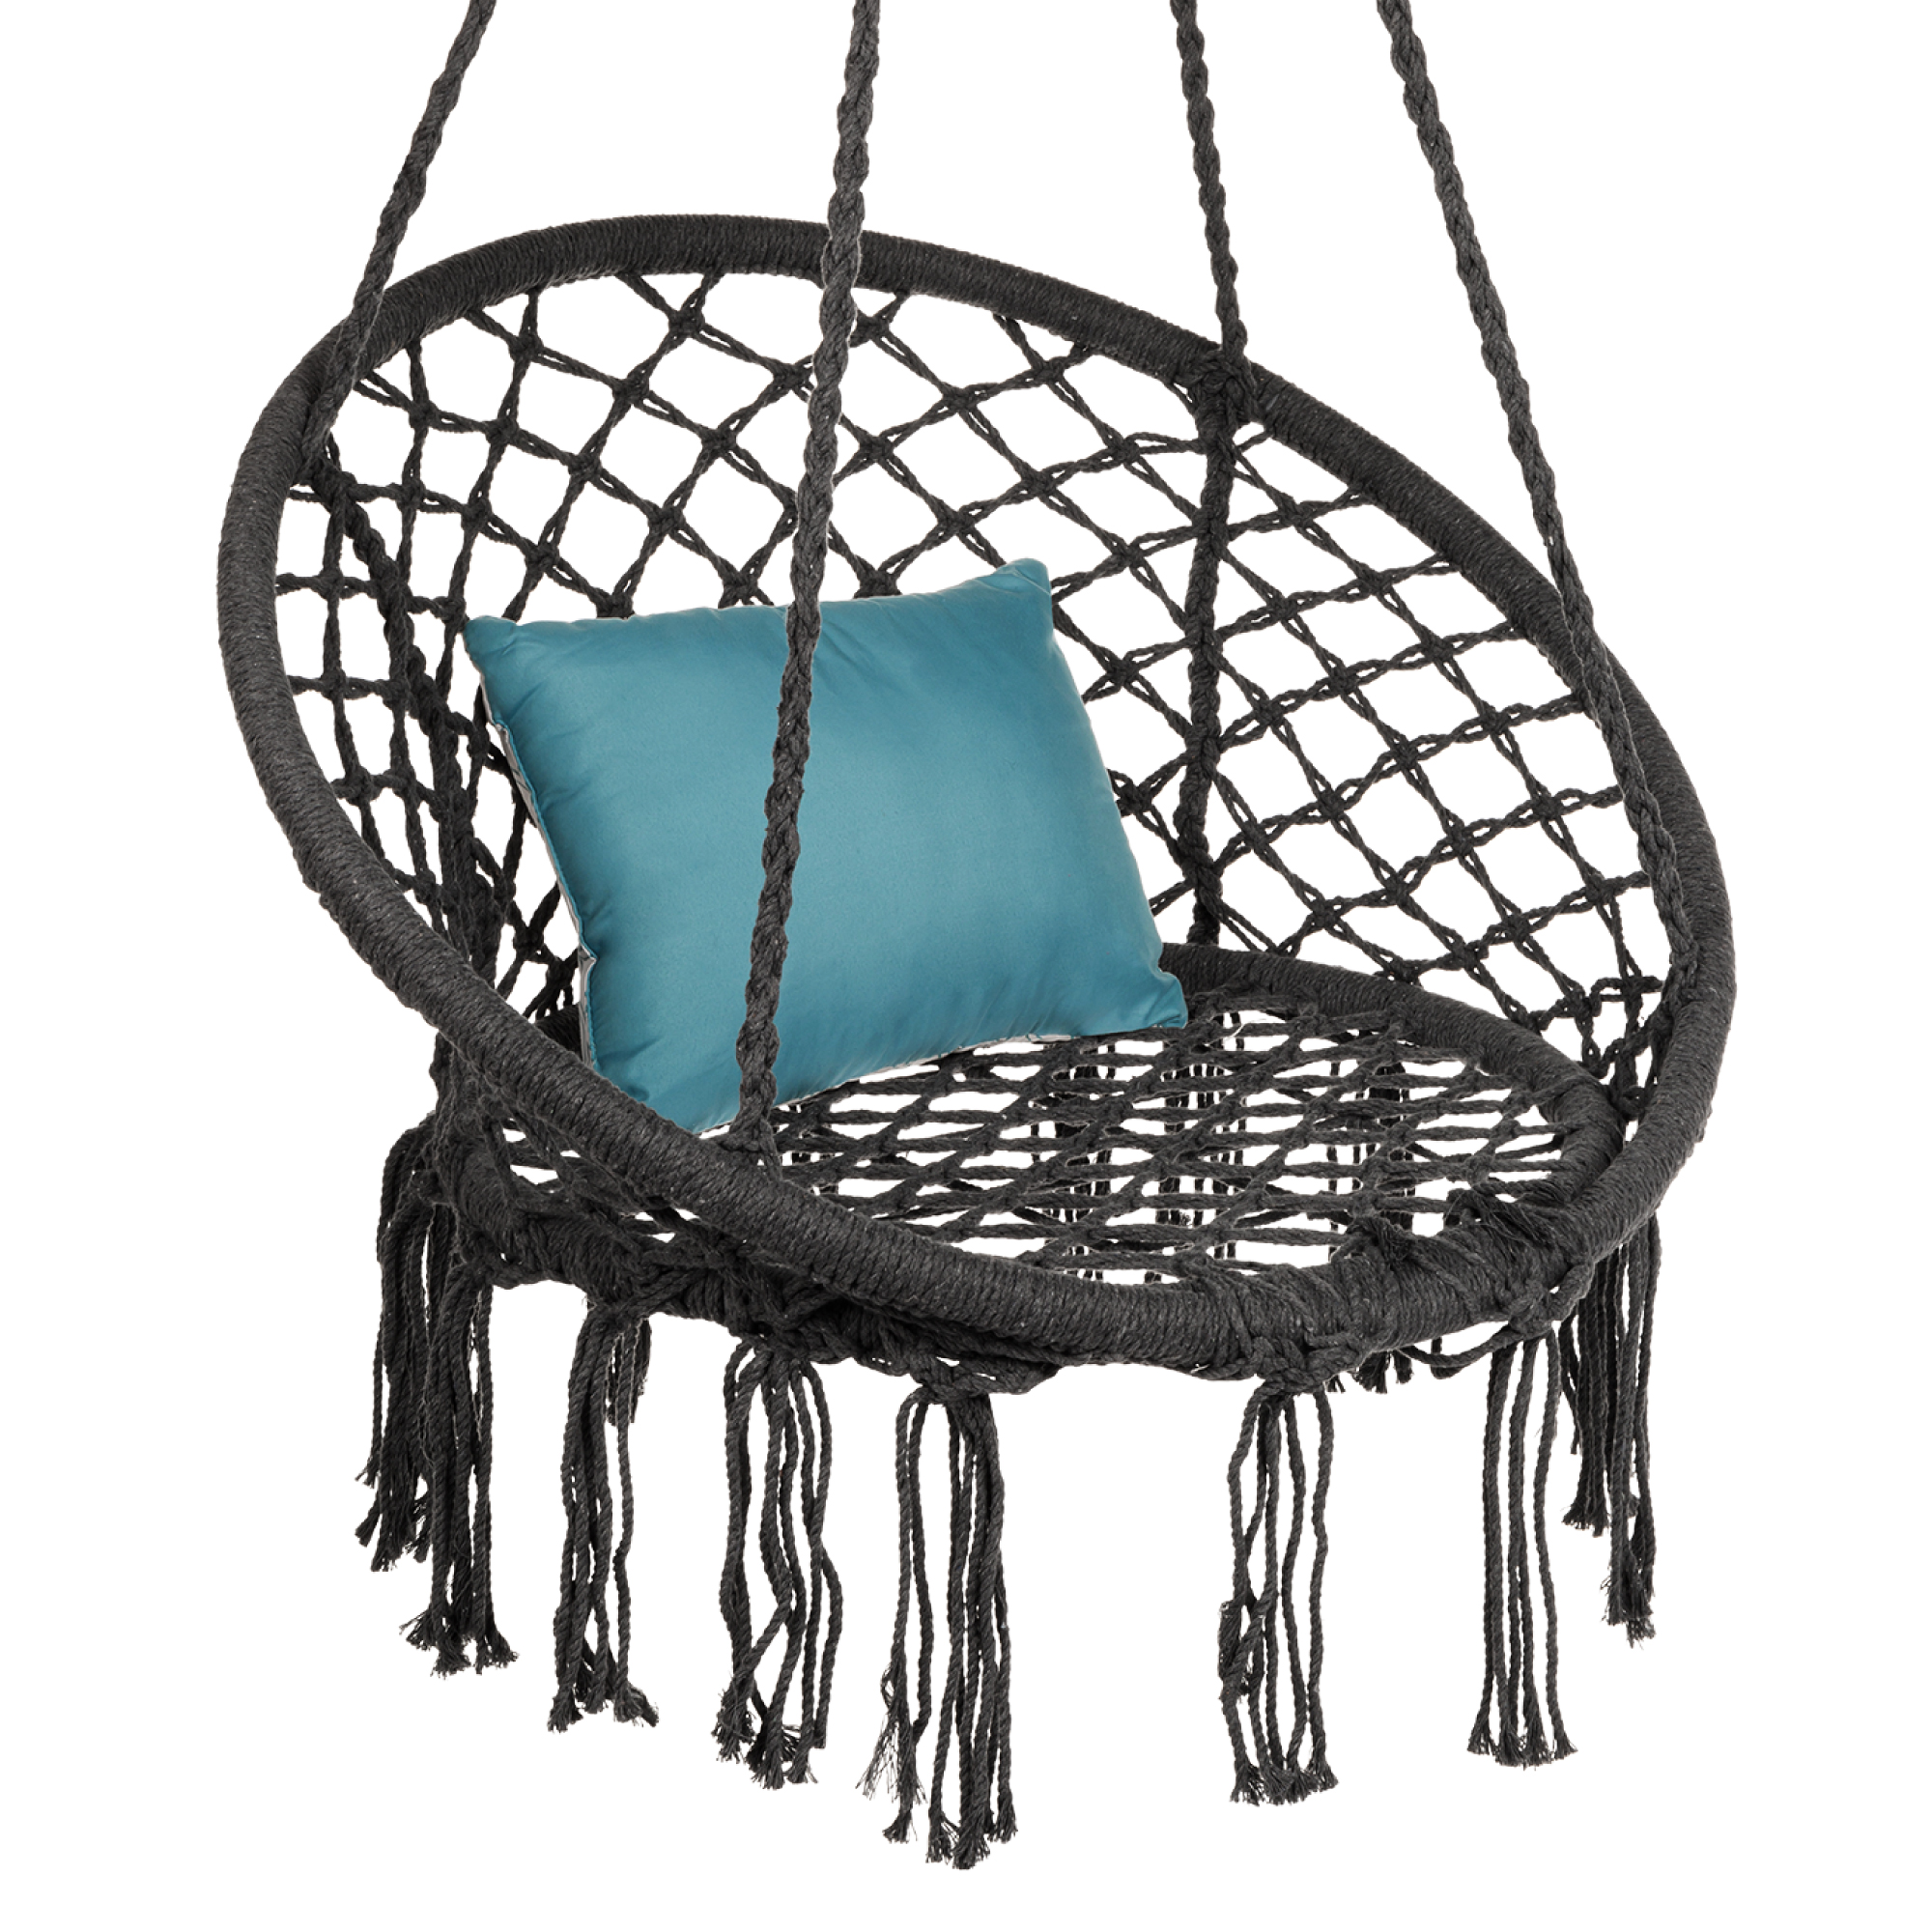 Best Choice Products Handwoven Cotton Macrame Hammock Hanging Chair Swing for Indoor & Outdoor Use w/ Backrest - Black - image 1 of 7